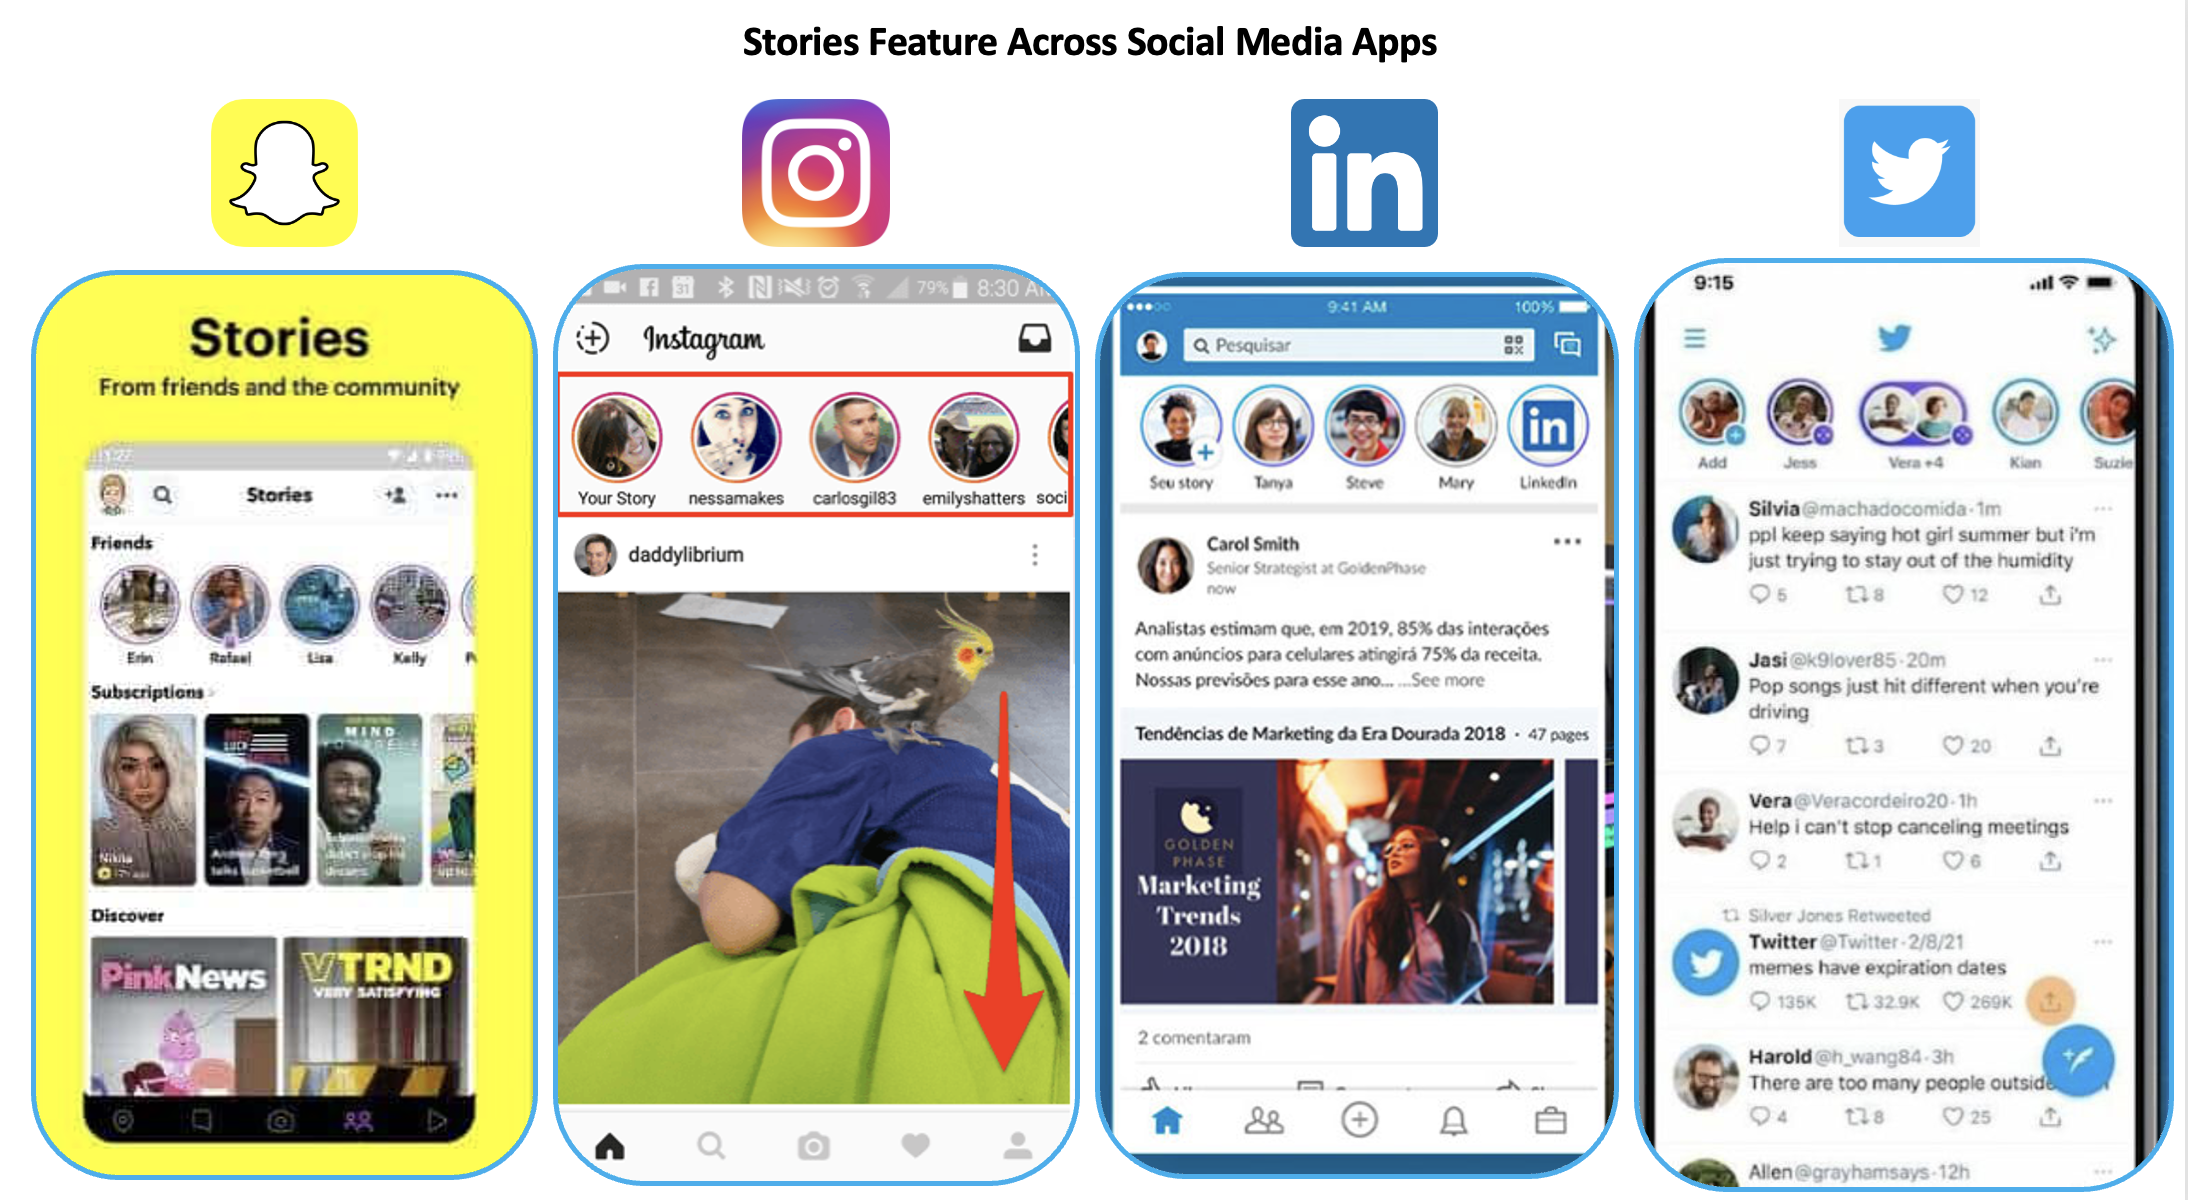 Snapchat invented the stories feature that has since become table-stakes across most major social media applications like Instagram, LinkedIn, and Twitter, among others